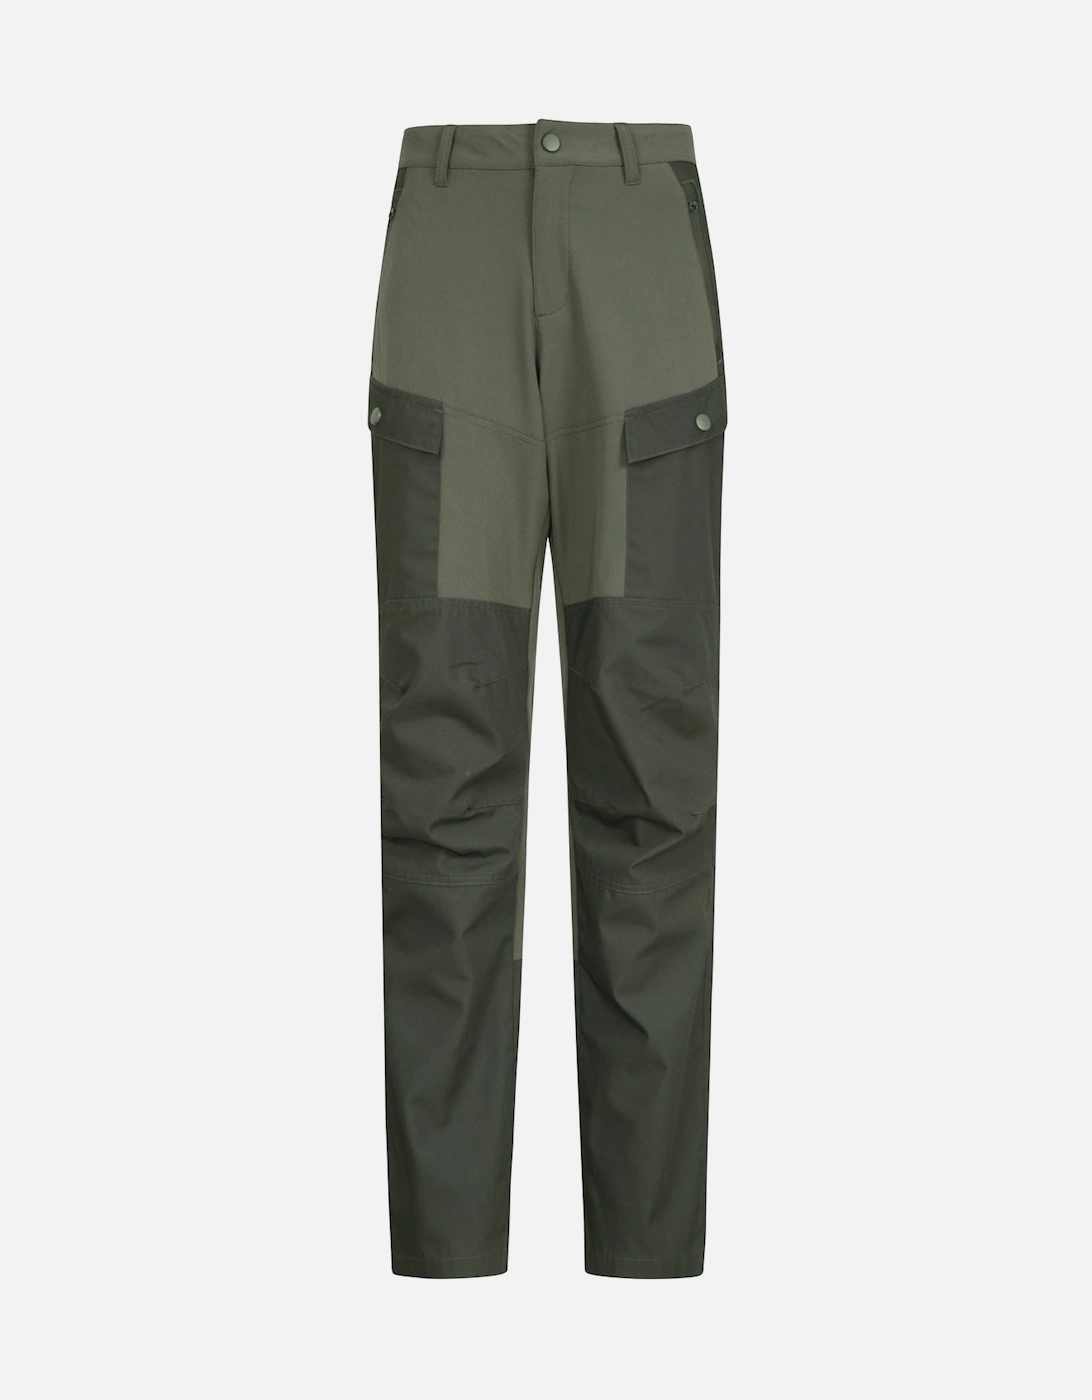 Womens/Ladies Expedition Hybrid Hiking Trousers, 5 of 4